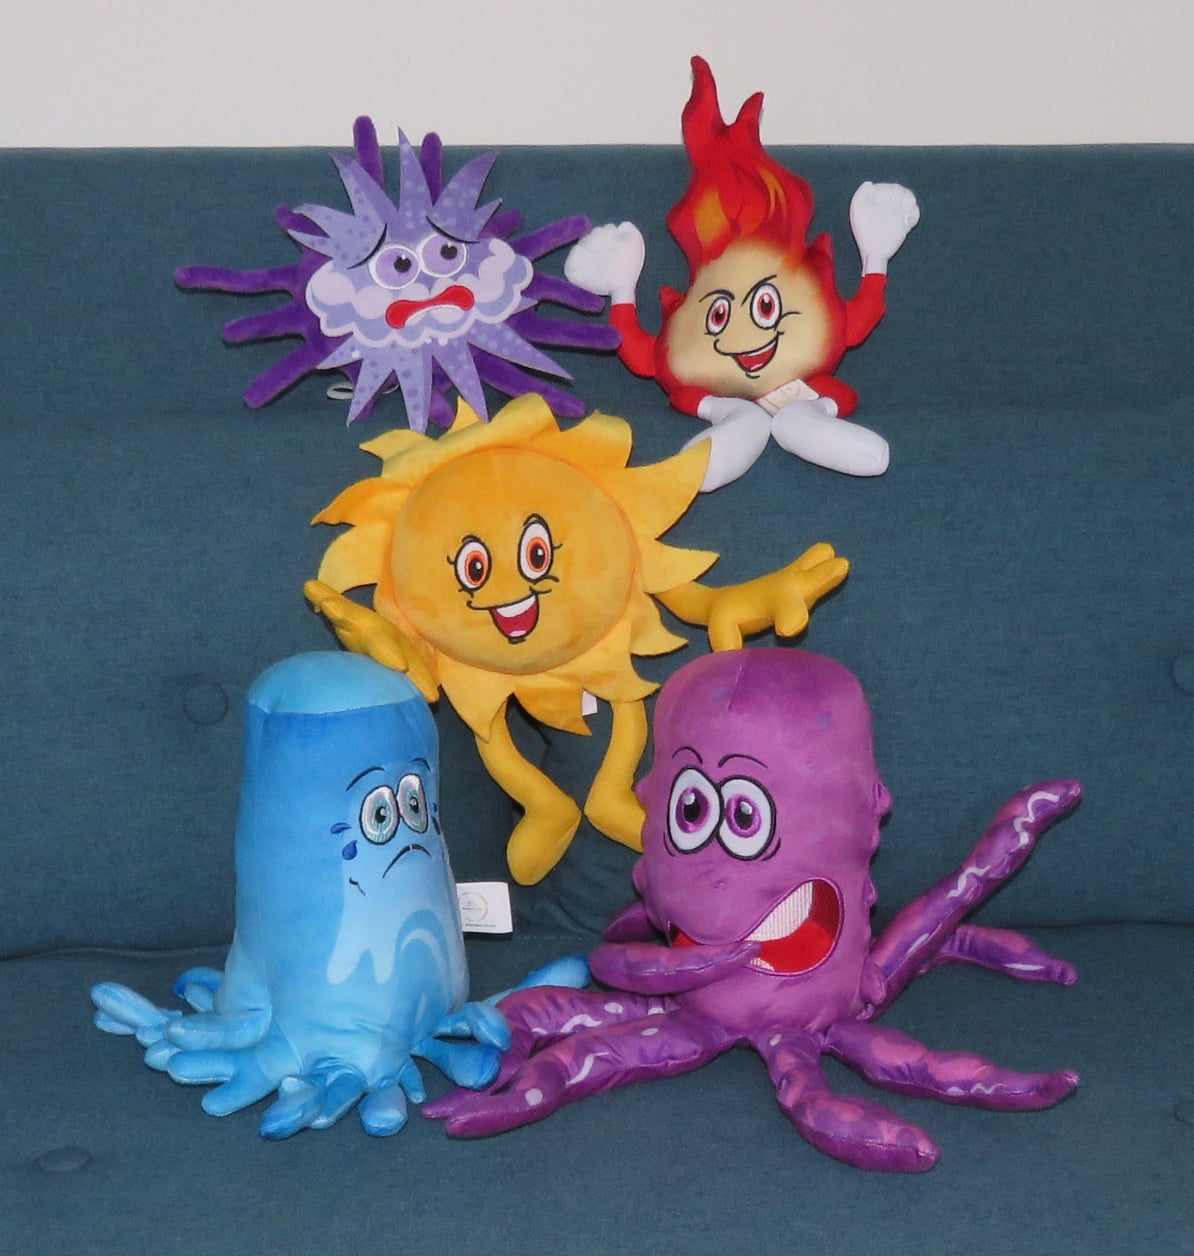 Anx (worry), Blaze (anger), Ray (happiness), Blue (sadness), Jitter (fear) Toys Set